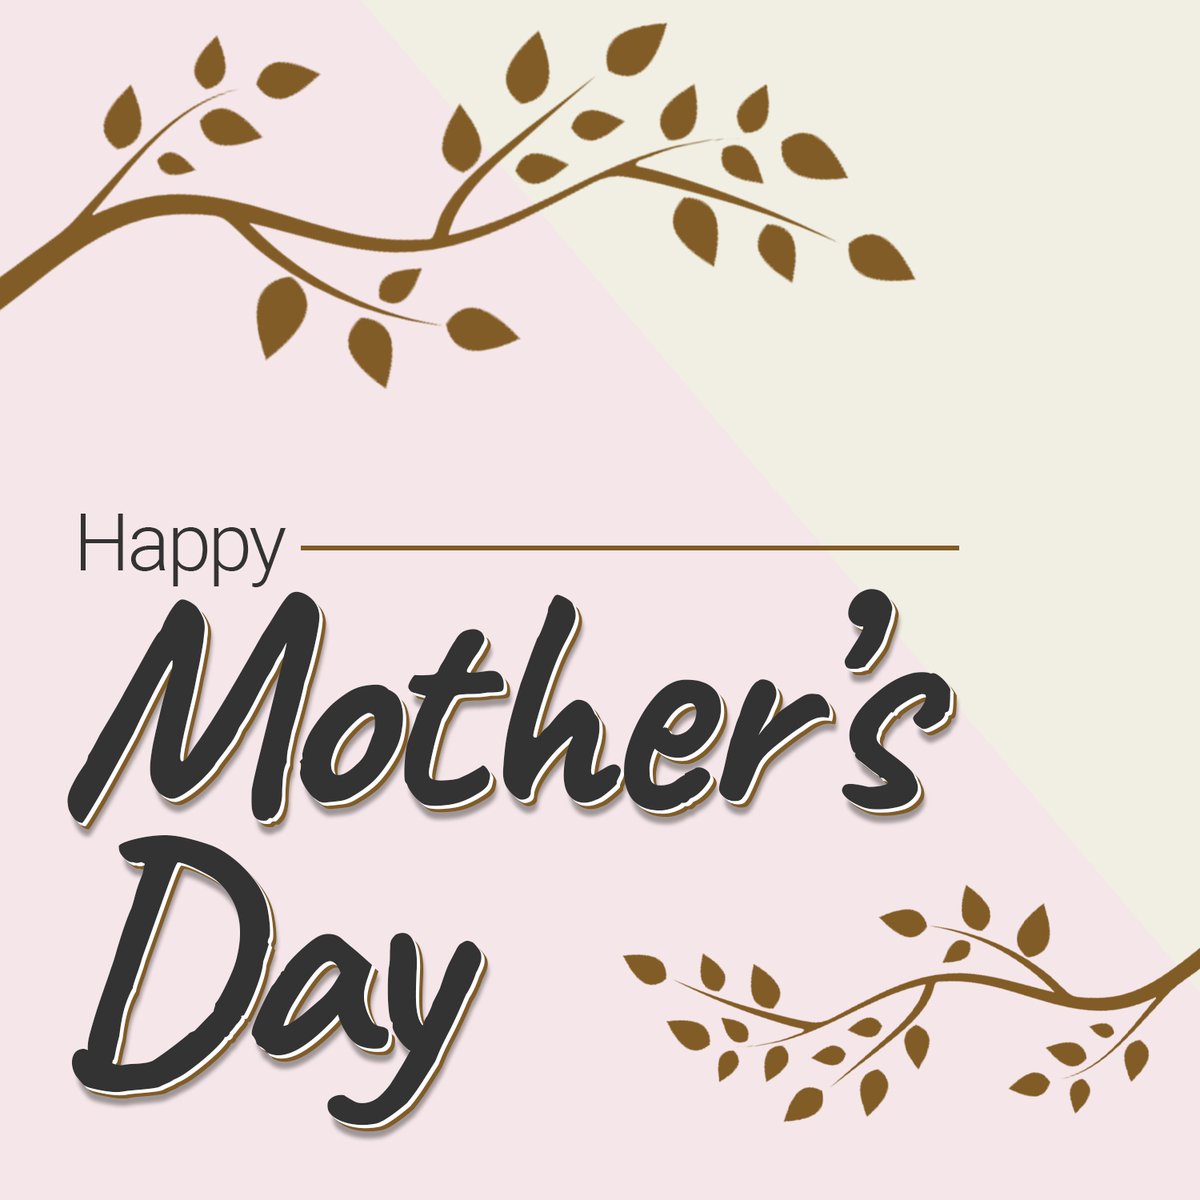 Motherhood is a journey marked by love, loss, hope, and immense strength. Today, we honor all of you. 

Happy Mother's Day.❤️ 

#FertilityWellnessInstitute #FertilityWellnessInstituteOhio #JourneyToParenthood #InfertilitySupport #MothersDay